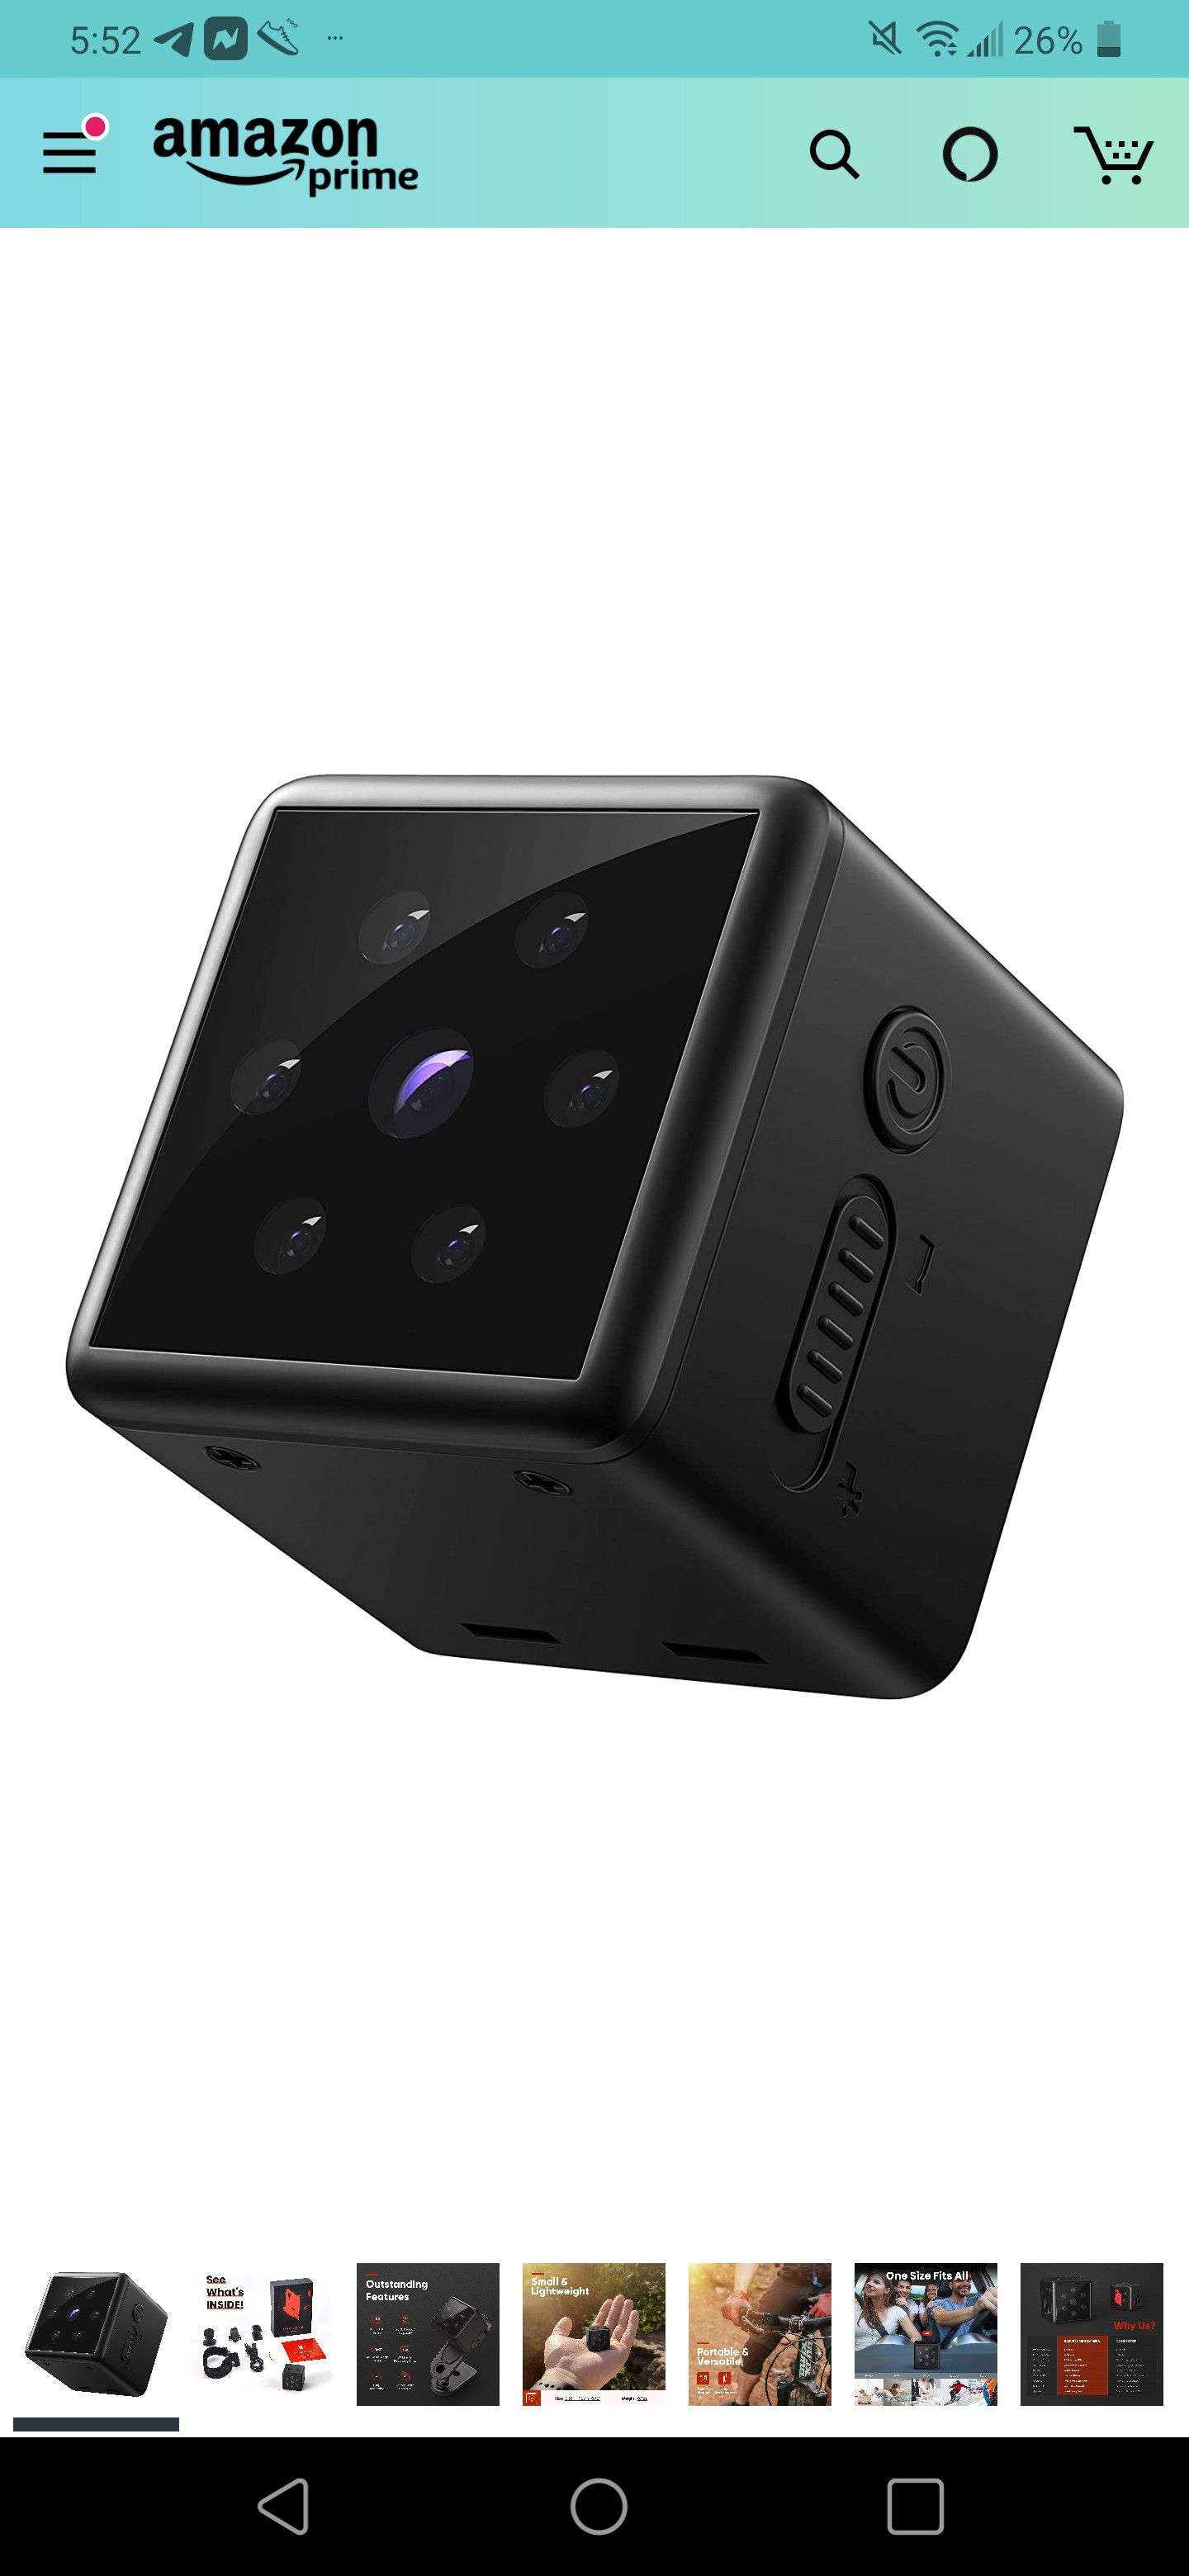 Mini Spy Camera 1080p Full HD - Mountable Hidden Camera With Motion Detection And Night Vision - Supports 8 to 128GB SD